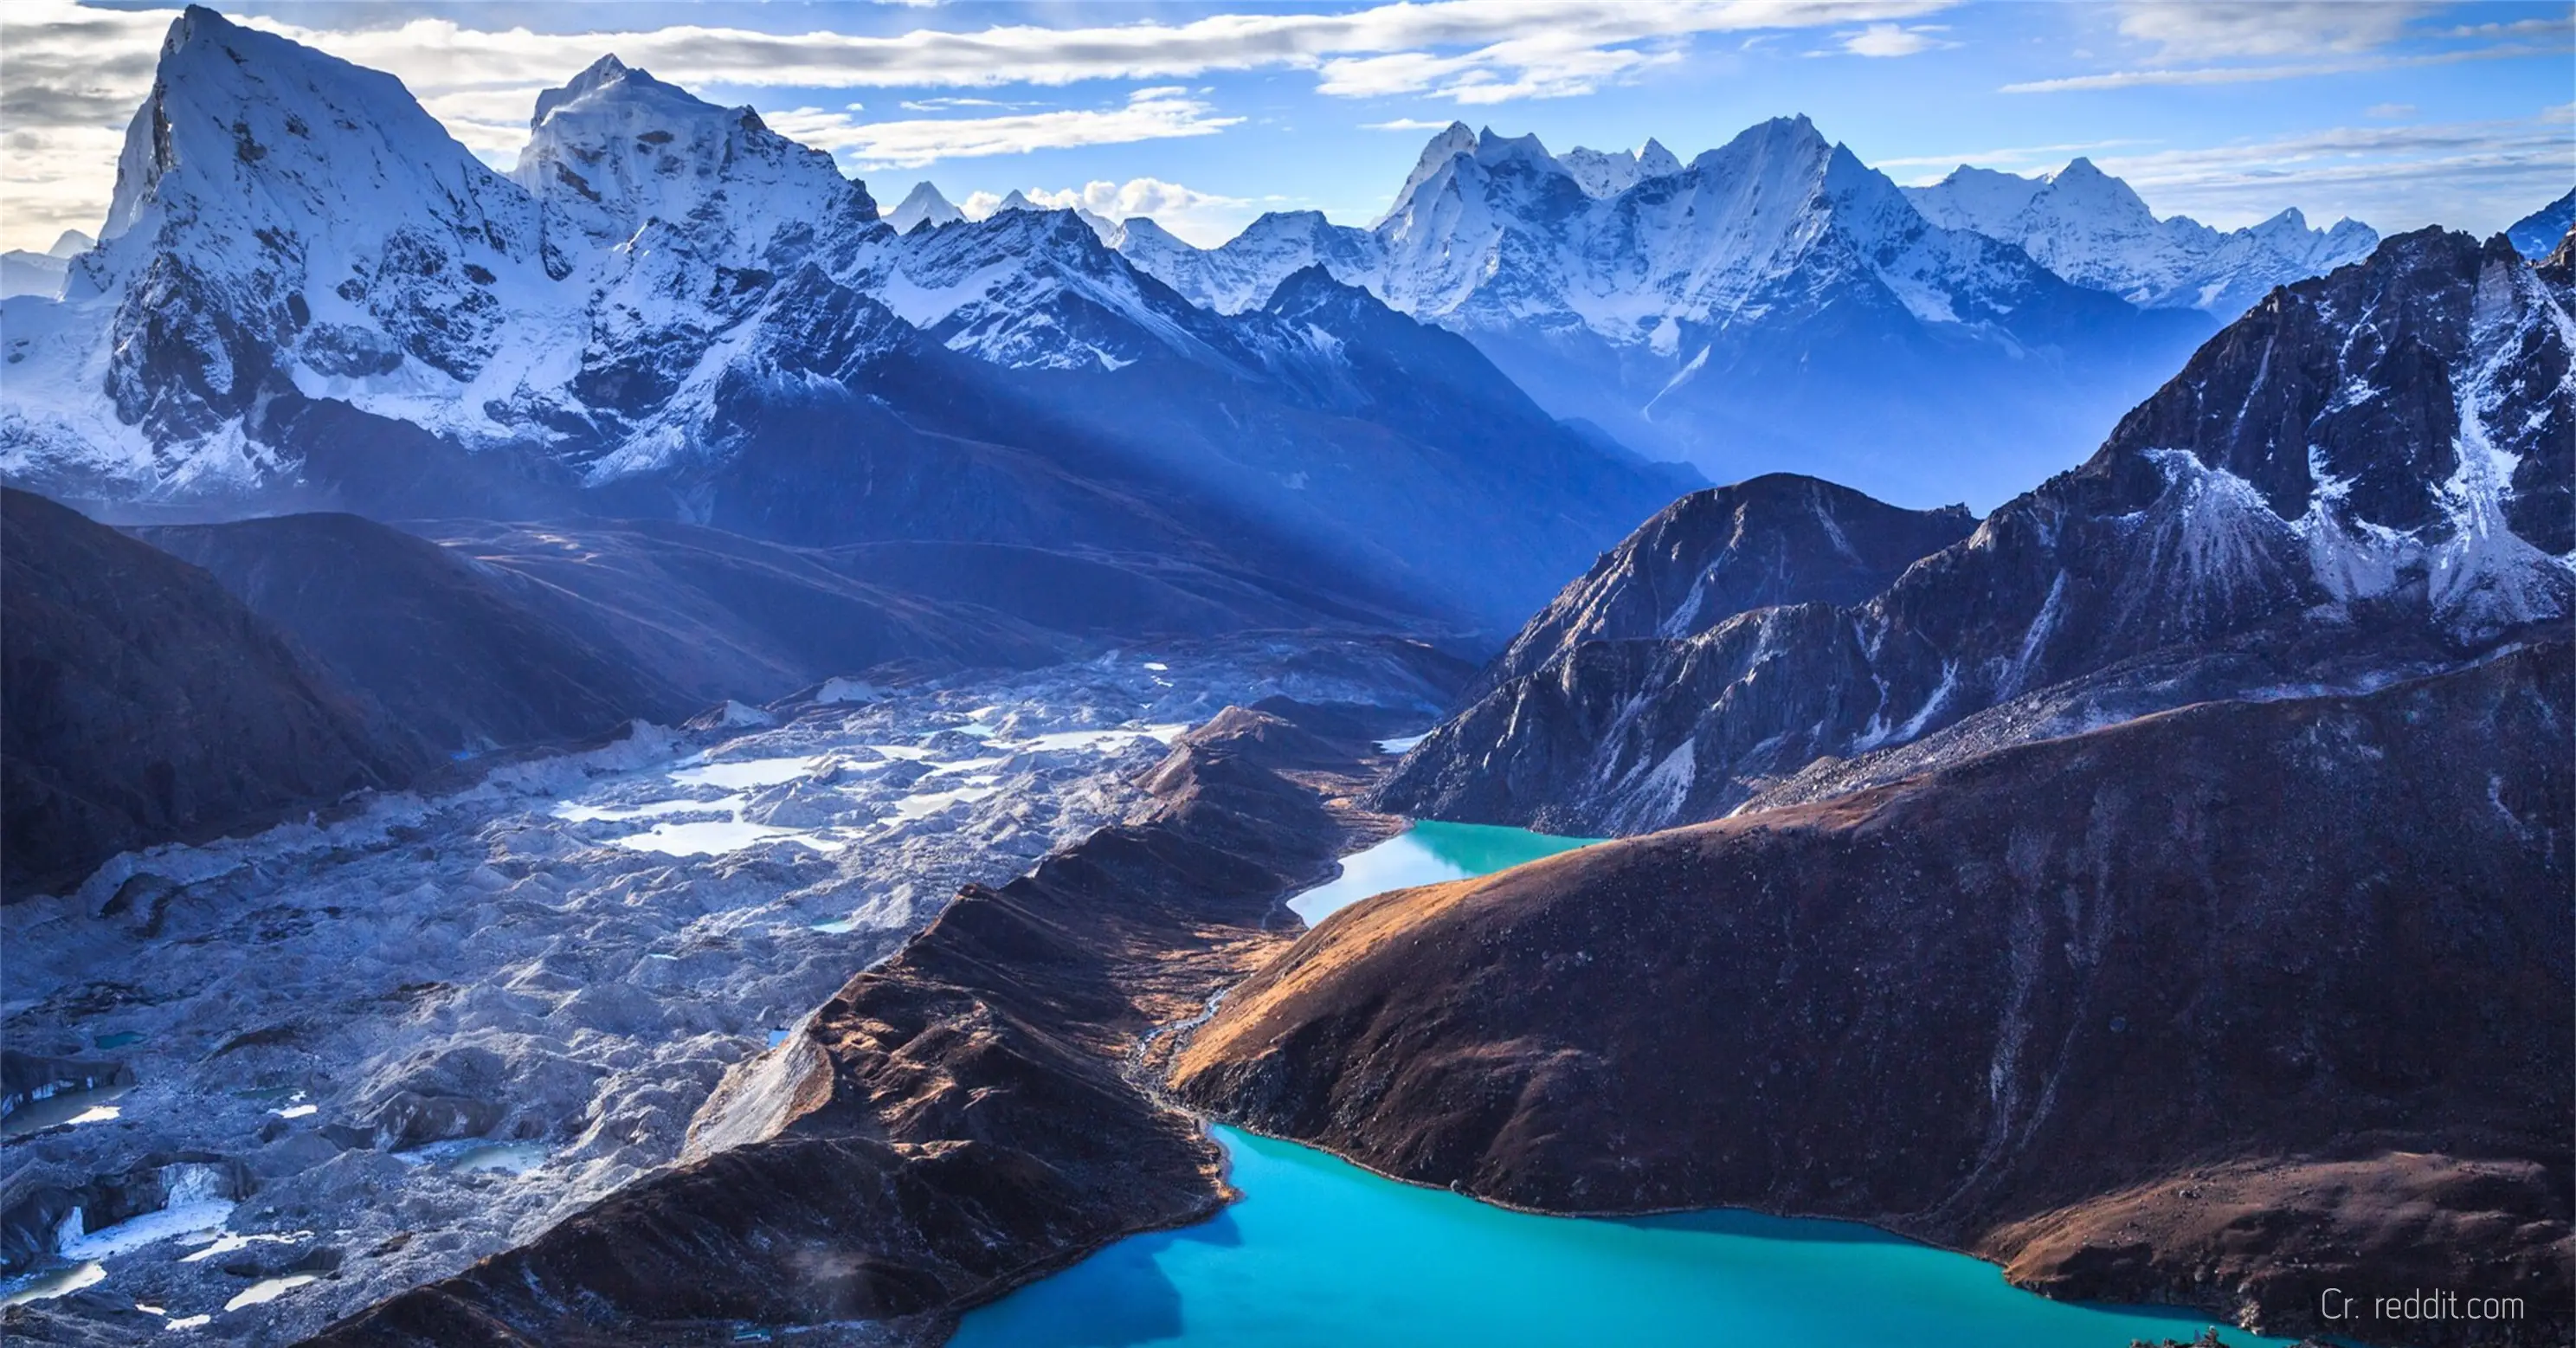 10-reasons-why-people-go-to-nepal-12